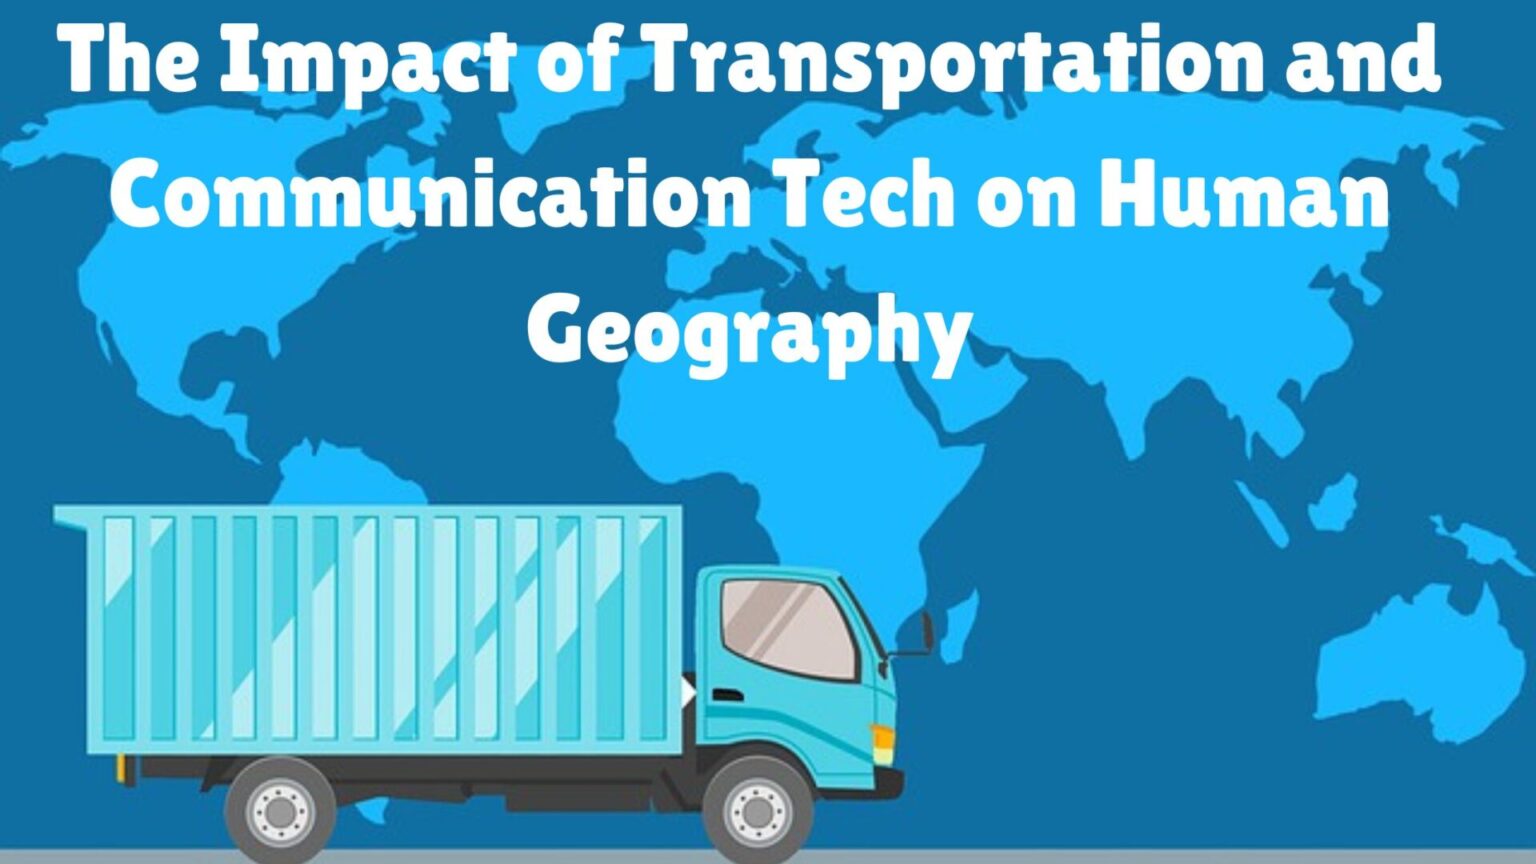 The Impact of Transportation and Communication Technology on Human Geography":